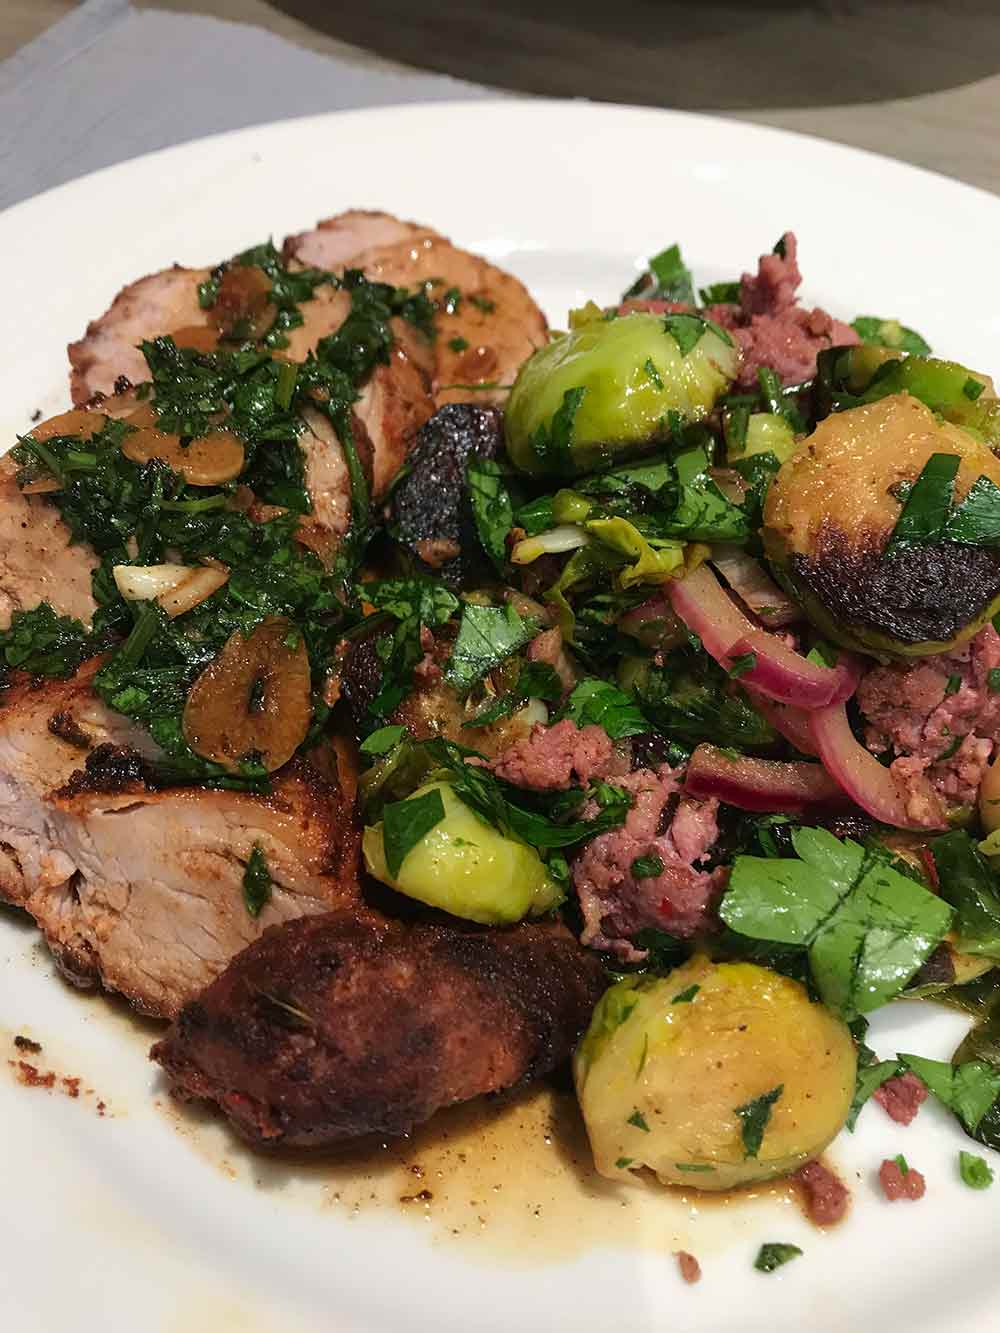 A plate with sliced roast pork tenderloin with paprika, potatoes, and Brussels sprouts